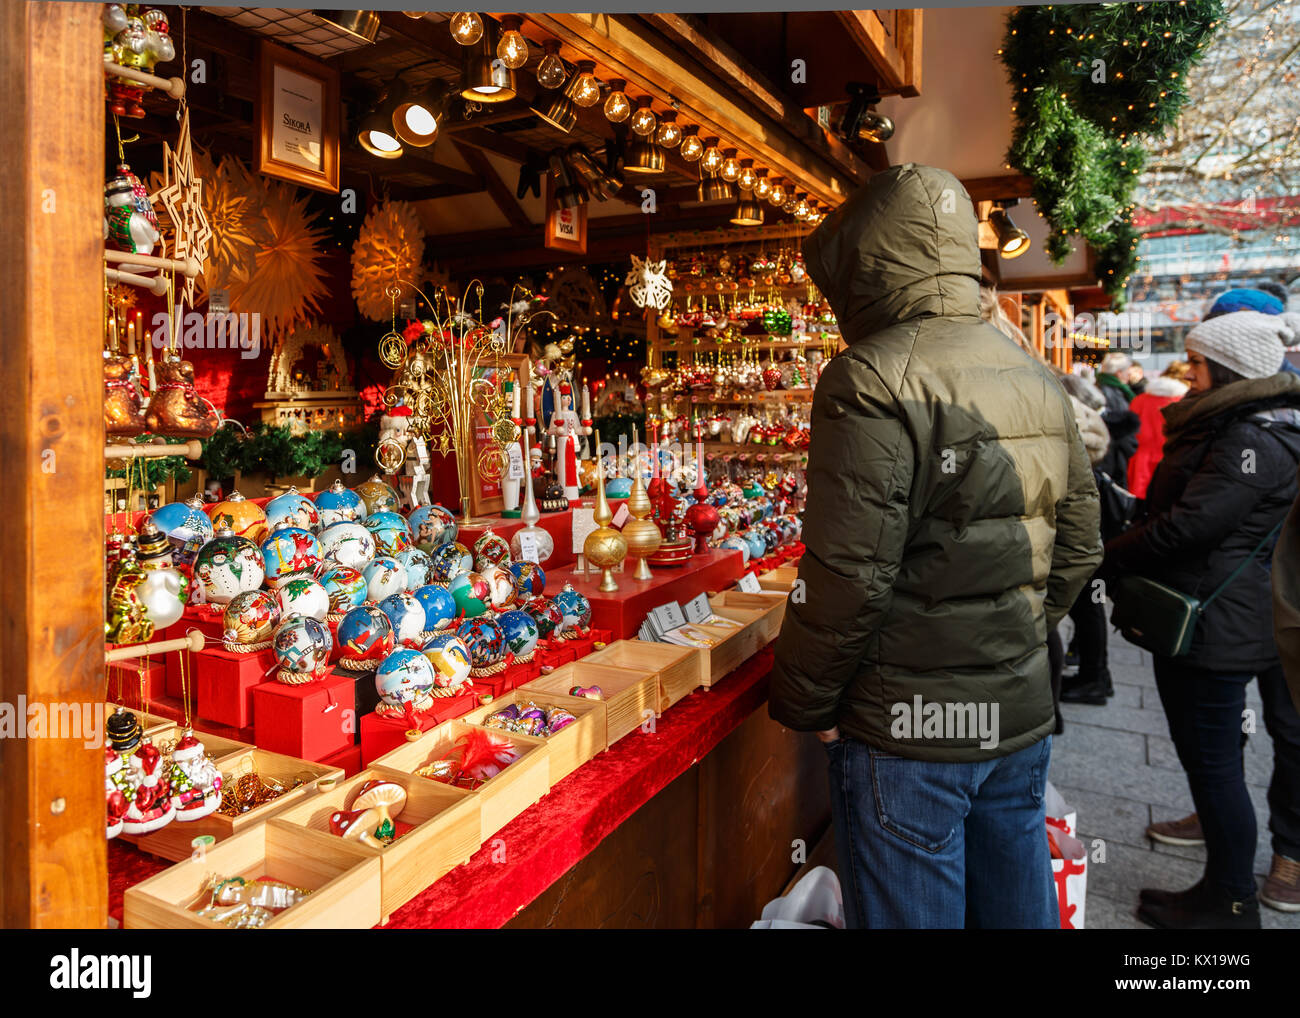 People shopping in the Christmas market, Berlin, Germany Stock Photo